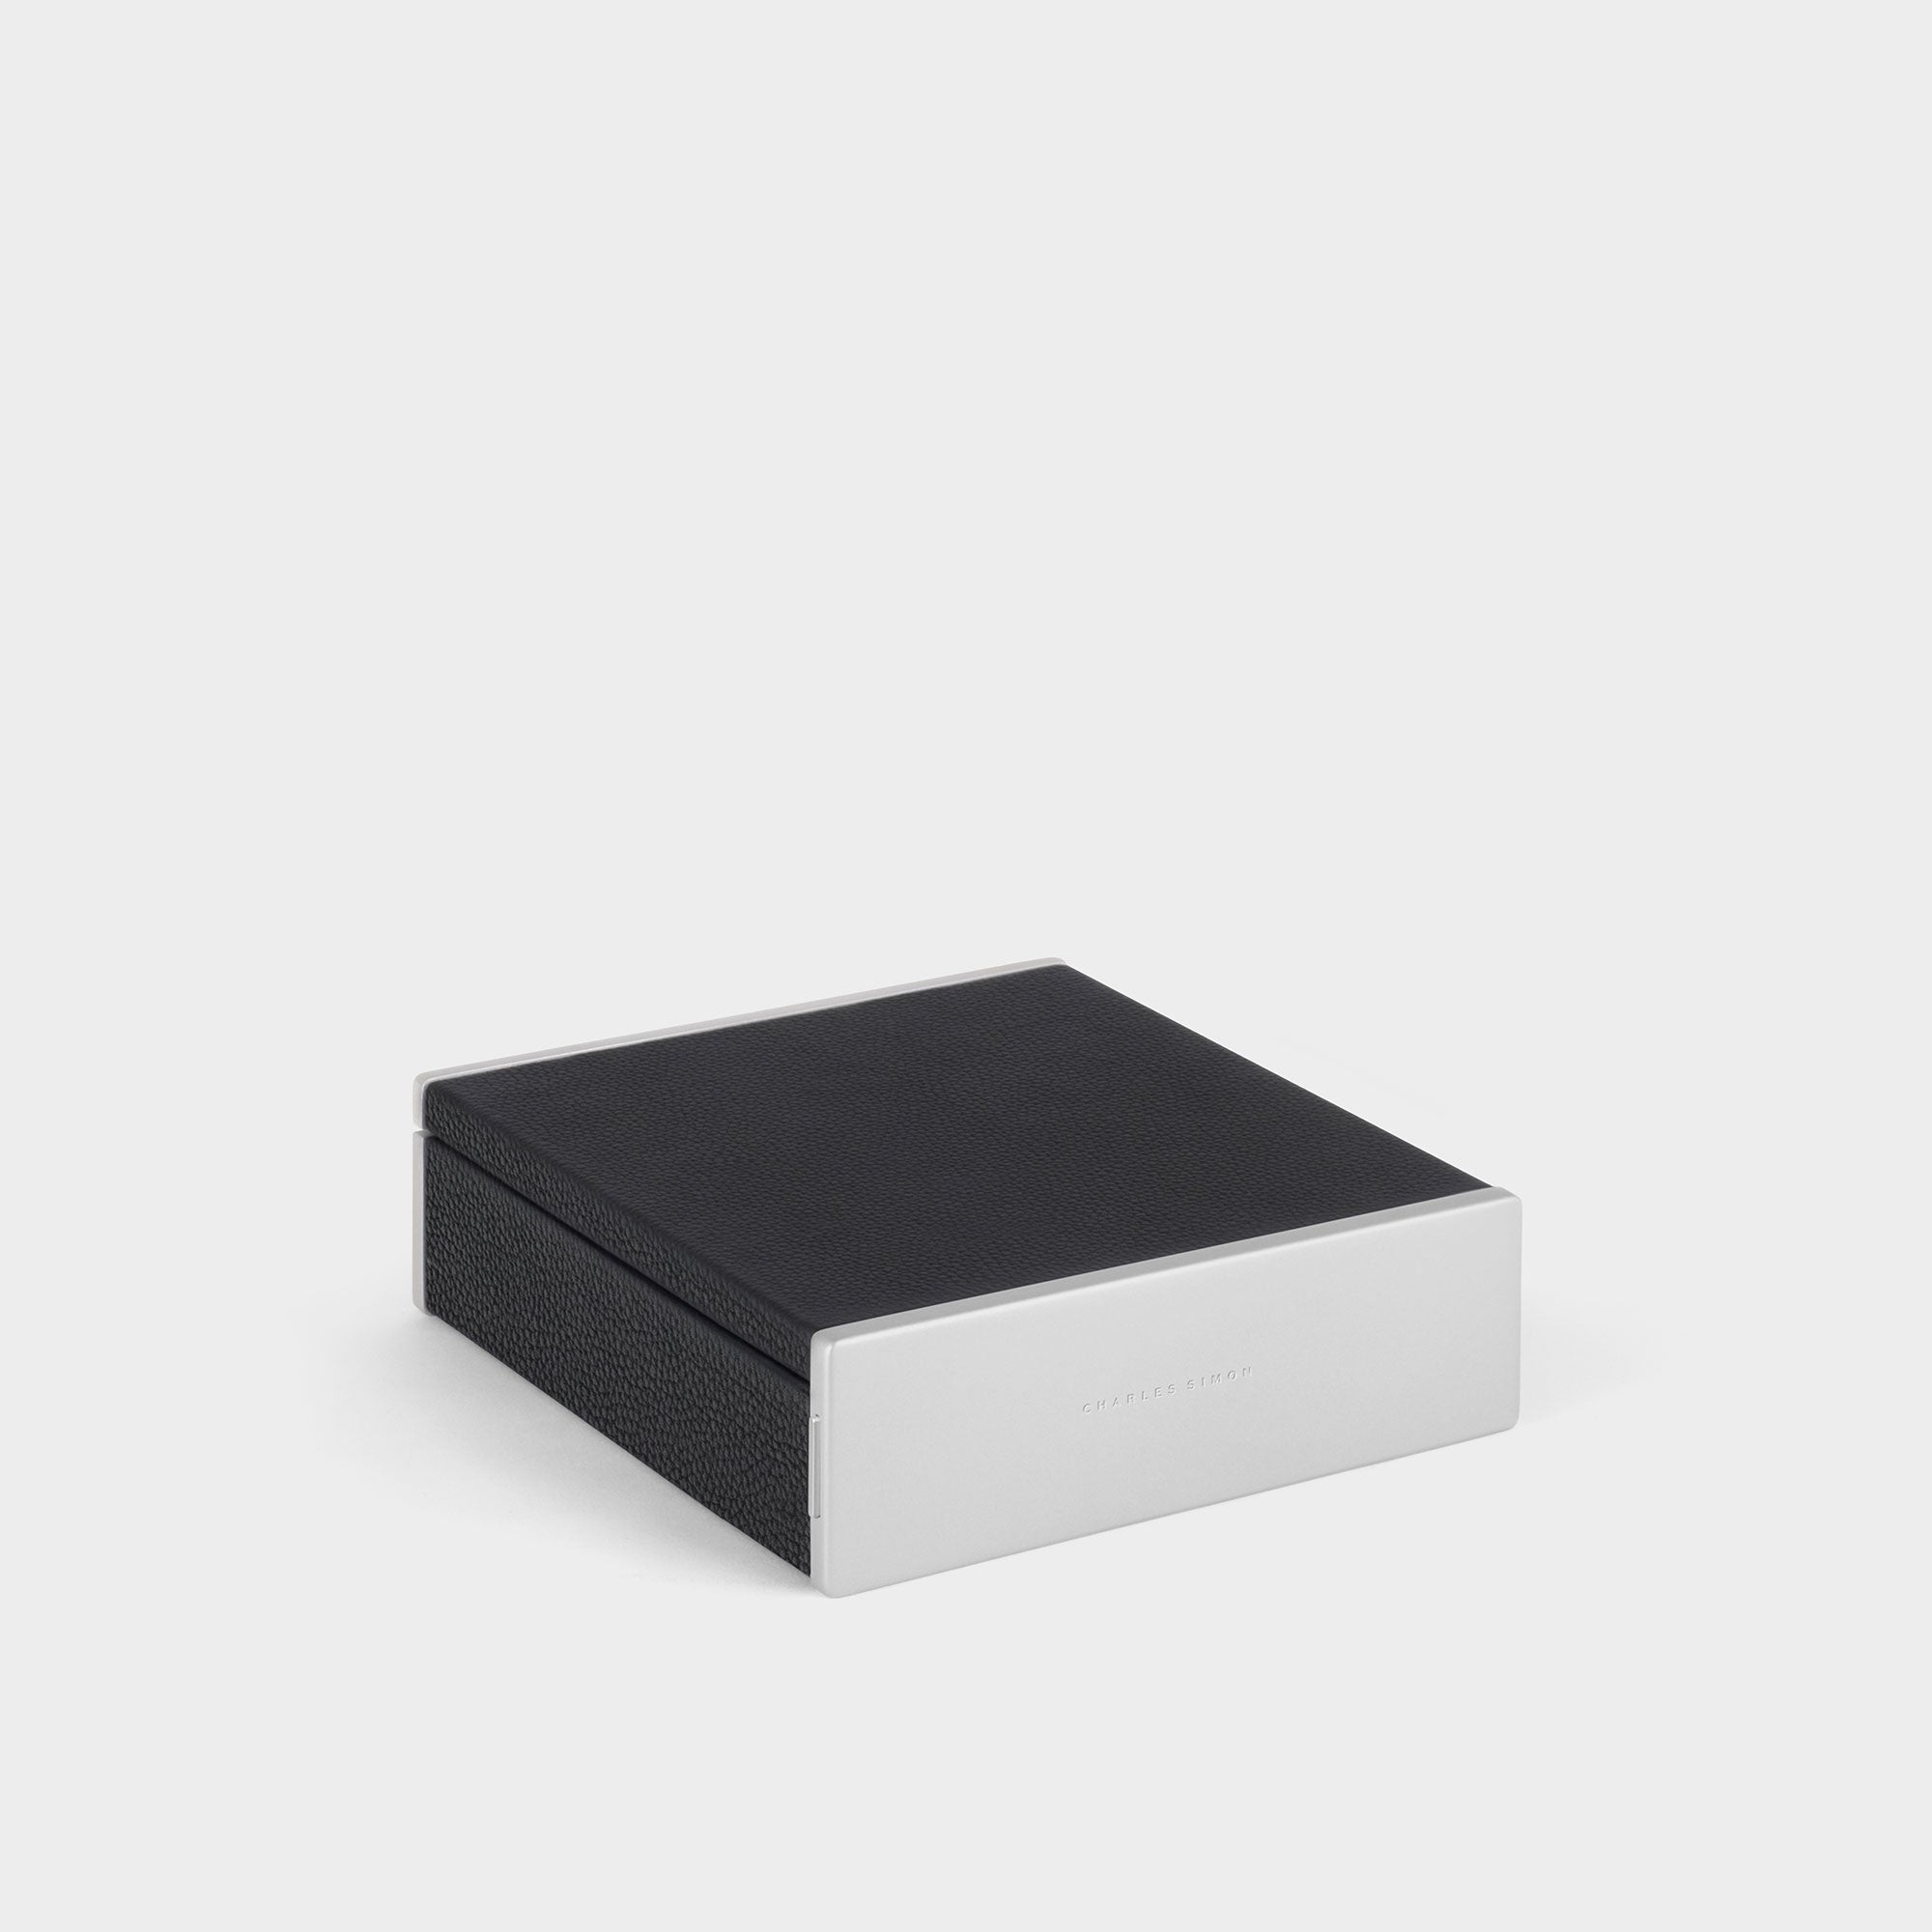 Closed designer watch box by Charles Simon. Handcrafted in Canada from black leather and grey interior